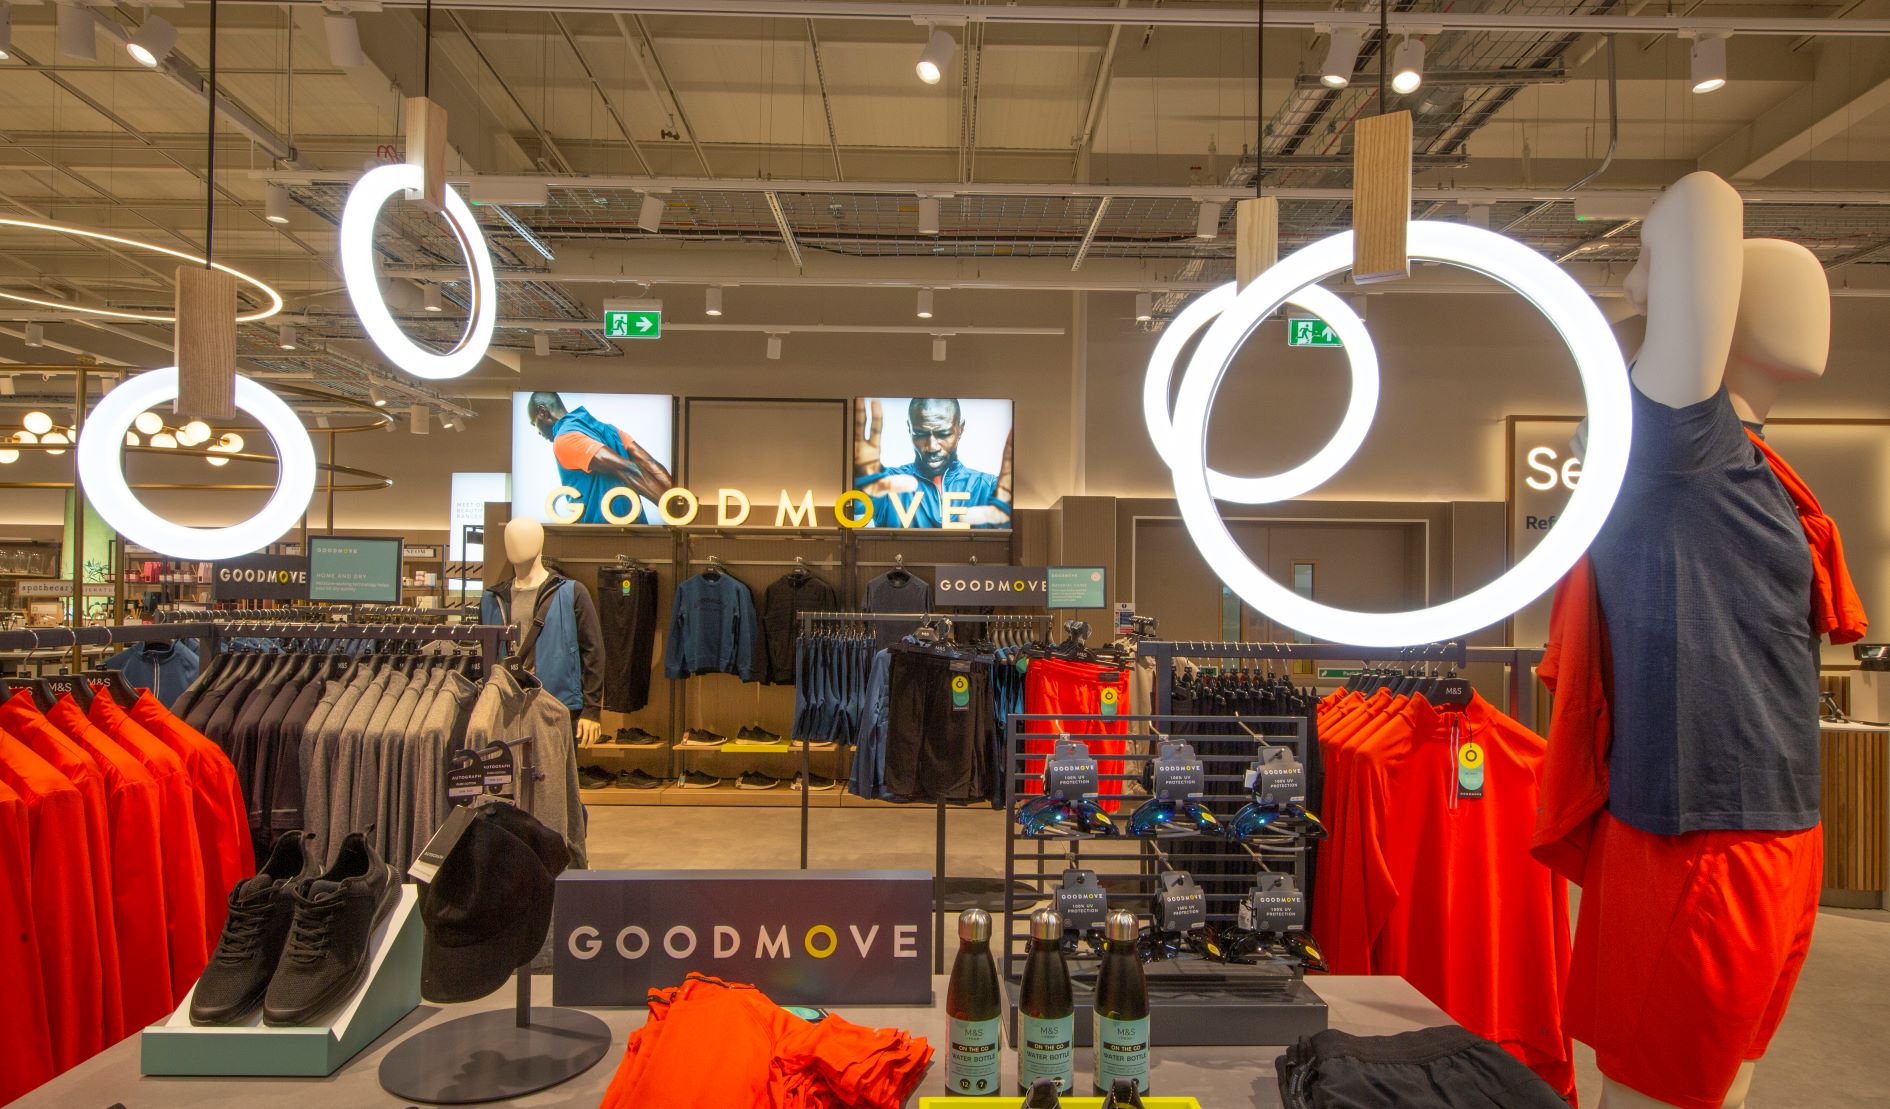 M&S has opened its new concept store in Stevenage